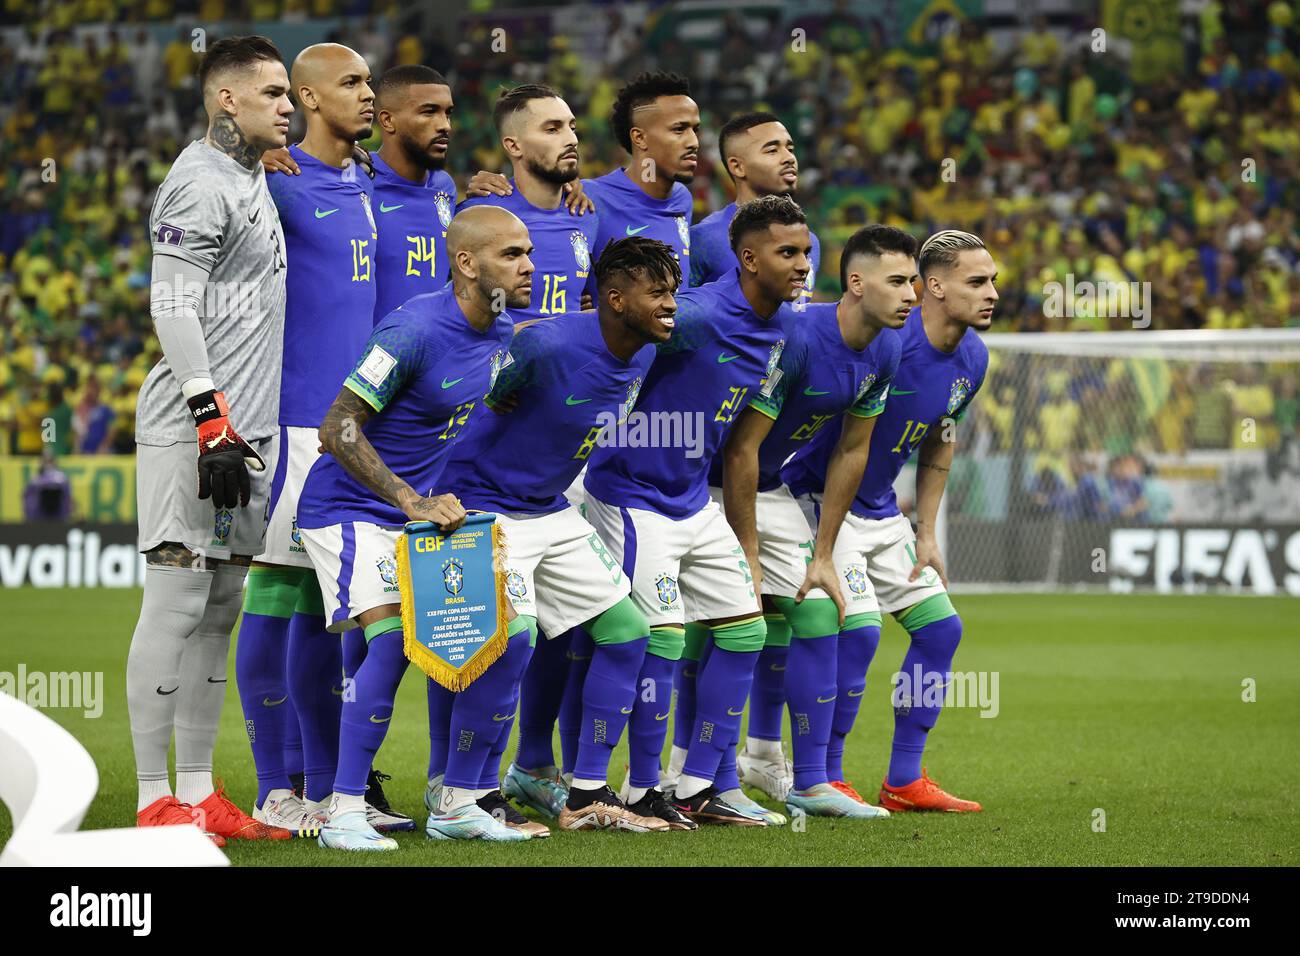 LUSAIL CITY (Top Row L-R) Brazil goalkeeper Emerson, Fabinho of Brazil, Gleison Bremer of Brazil, Alex Telles of Brazil, Eder Militao of Brazil, Gabriel Jesus of Brazil(Front row L-R) Dani Alves of Brazil, Fred of Brazil, Rodrigo of Brazil, Vinicius Junior of Brazil, Antony of Brazil during the FIFA World Cup Qatar 2022 group G match between Cameroon and Brazil at Lusail Stadium on December 2, 2022 in Lusail City, Qatar. ANP | Hollandse Hoogte | MAURICE VAN STEEN Stock Photo